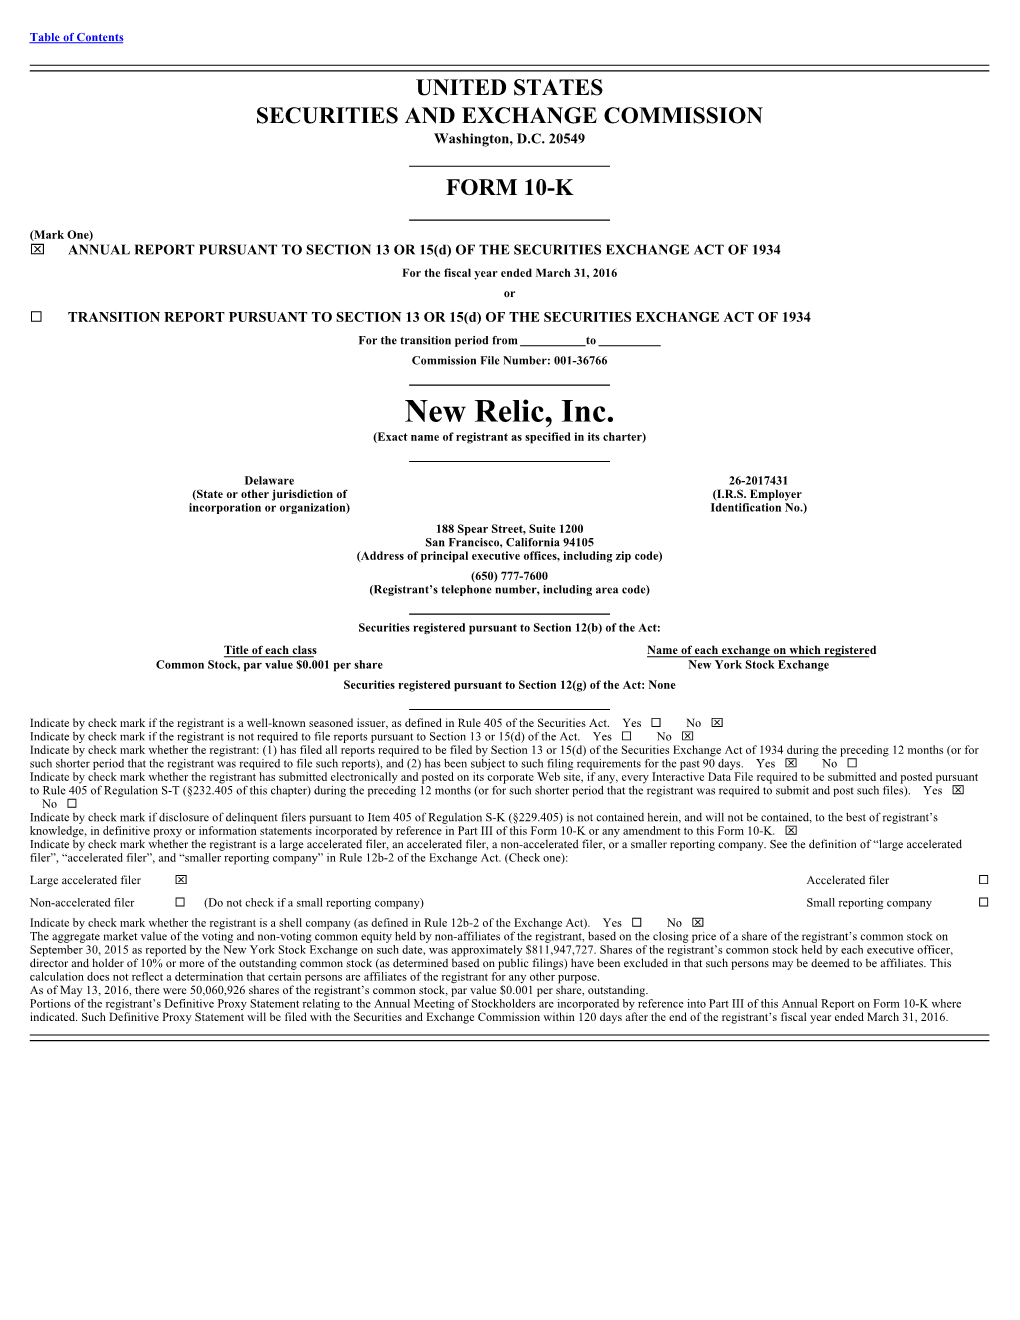 New Relic, Inc. (Exact Name of Registrant As Specified in Its Charter)